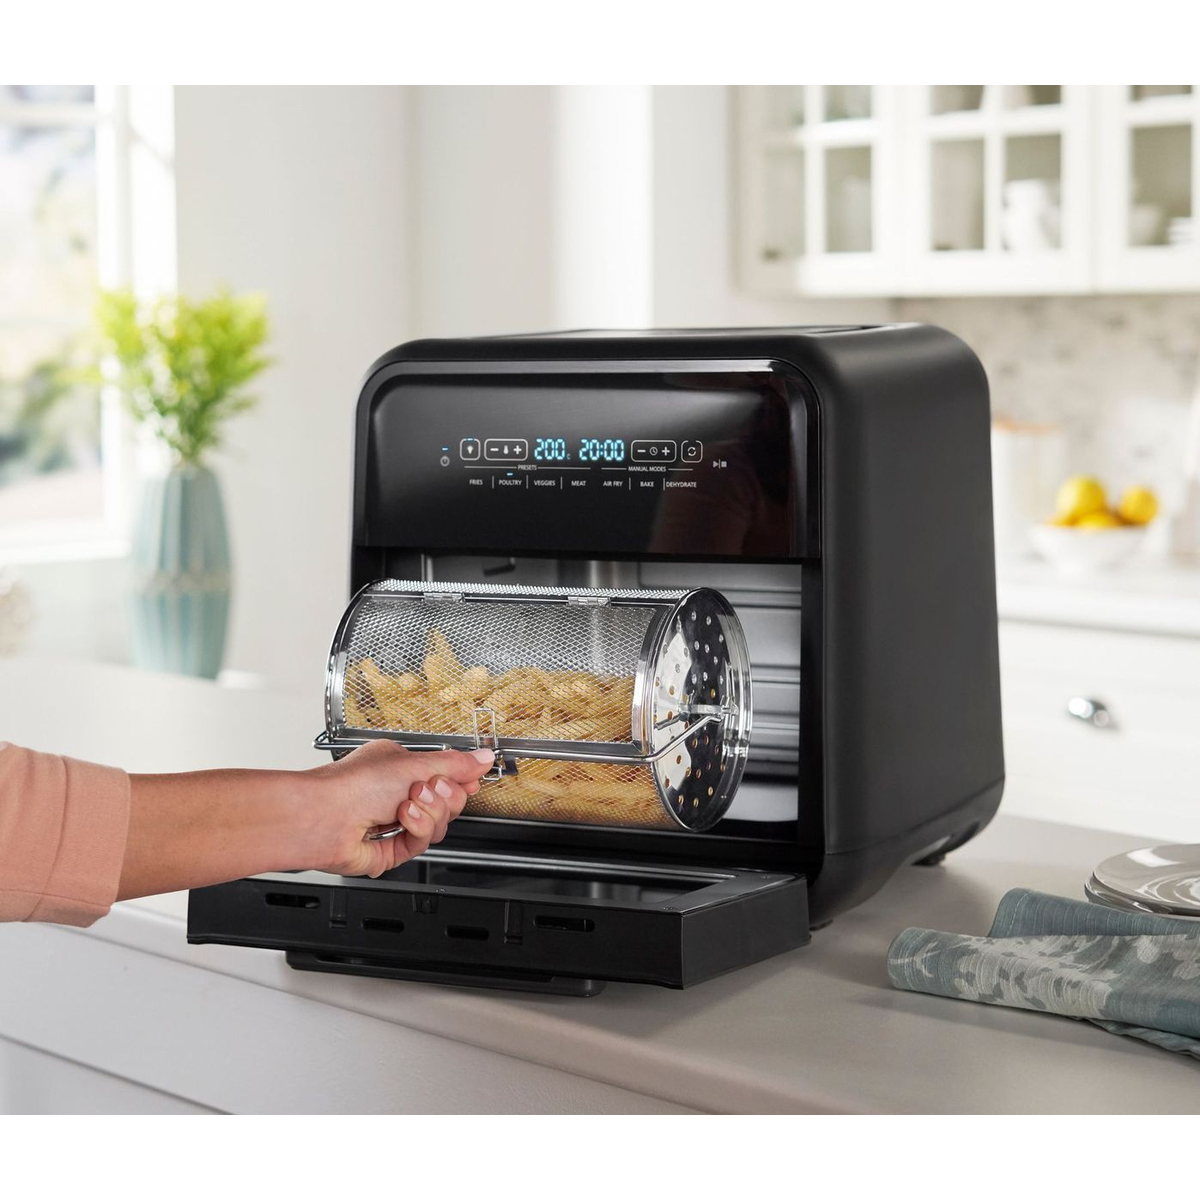 Air Fryer Oven features